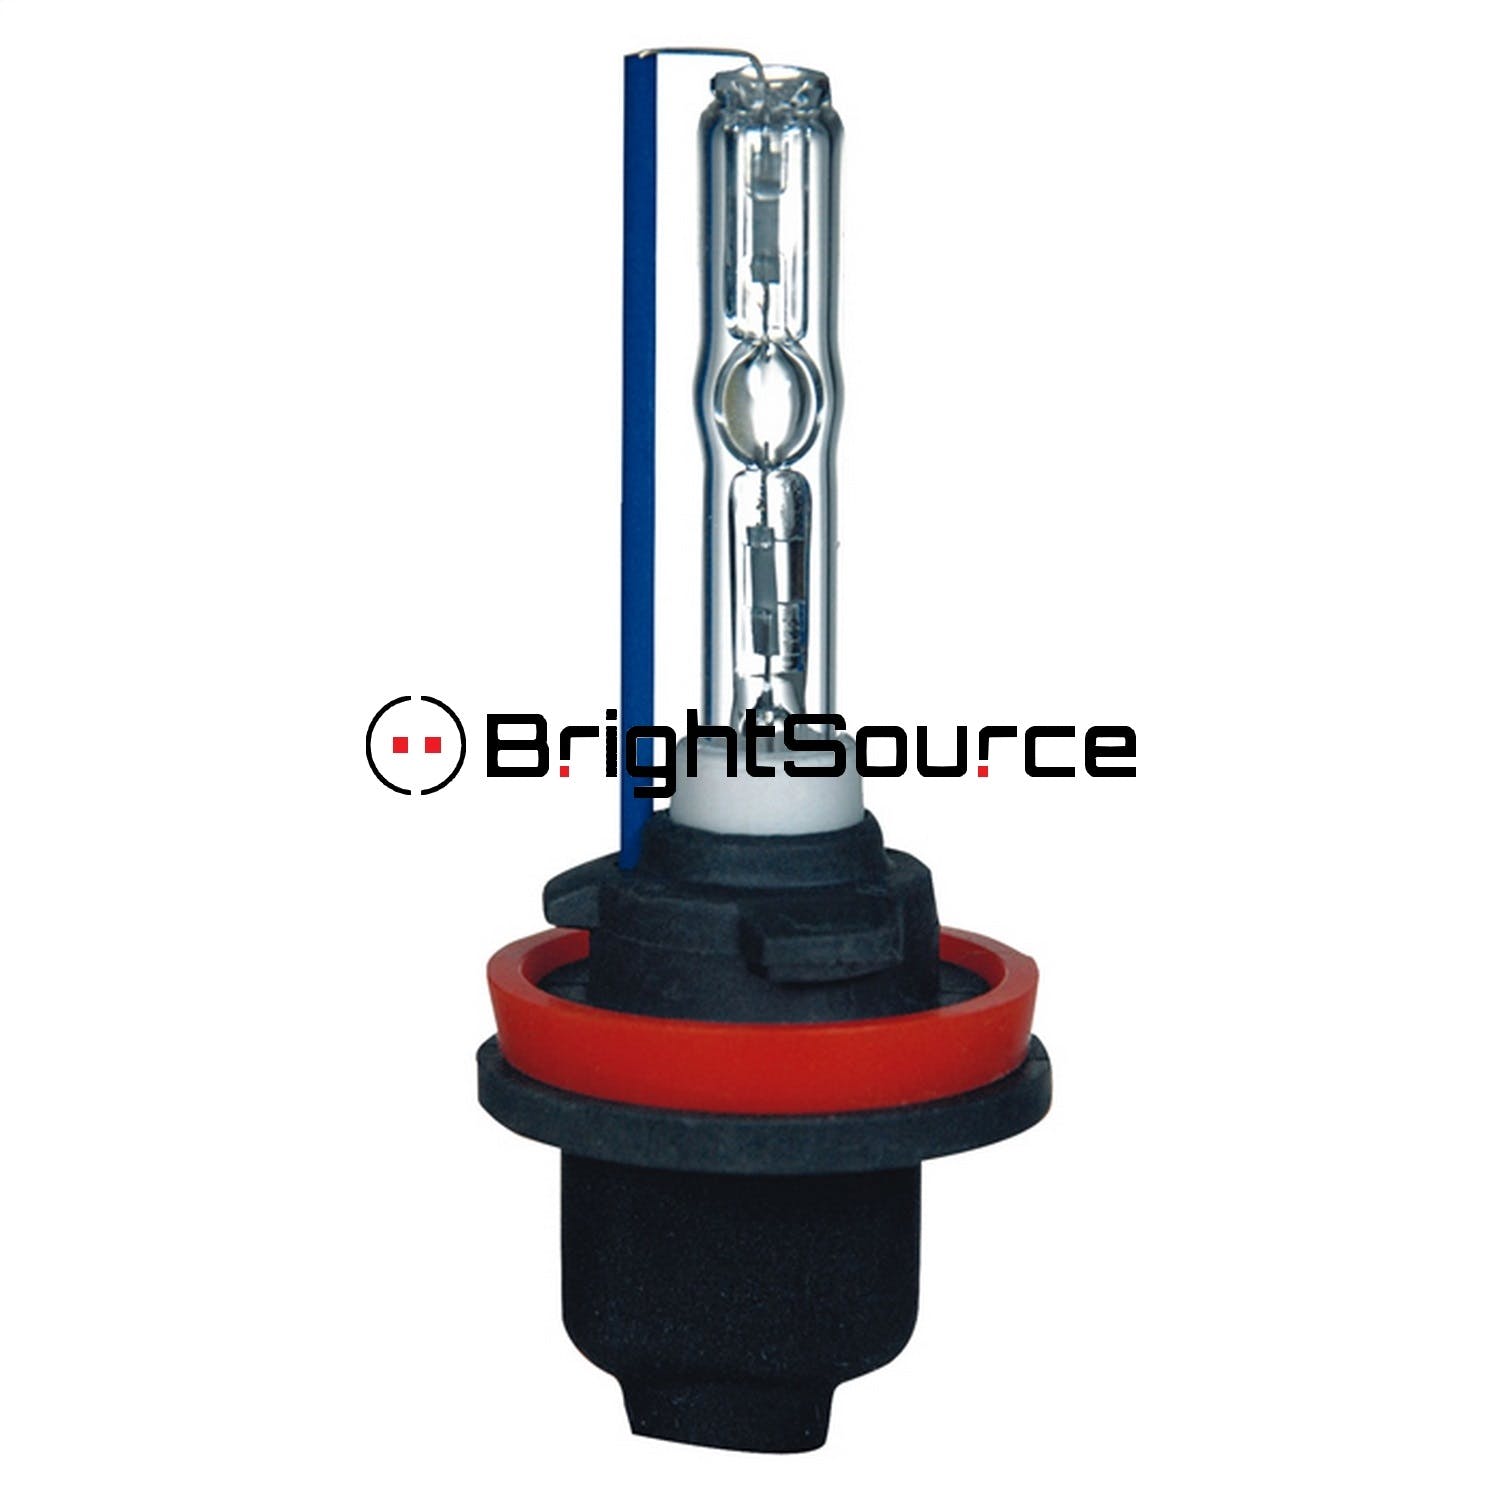 BrightSource 39998 HID Kit